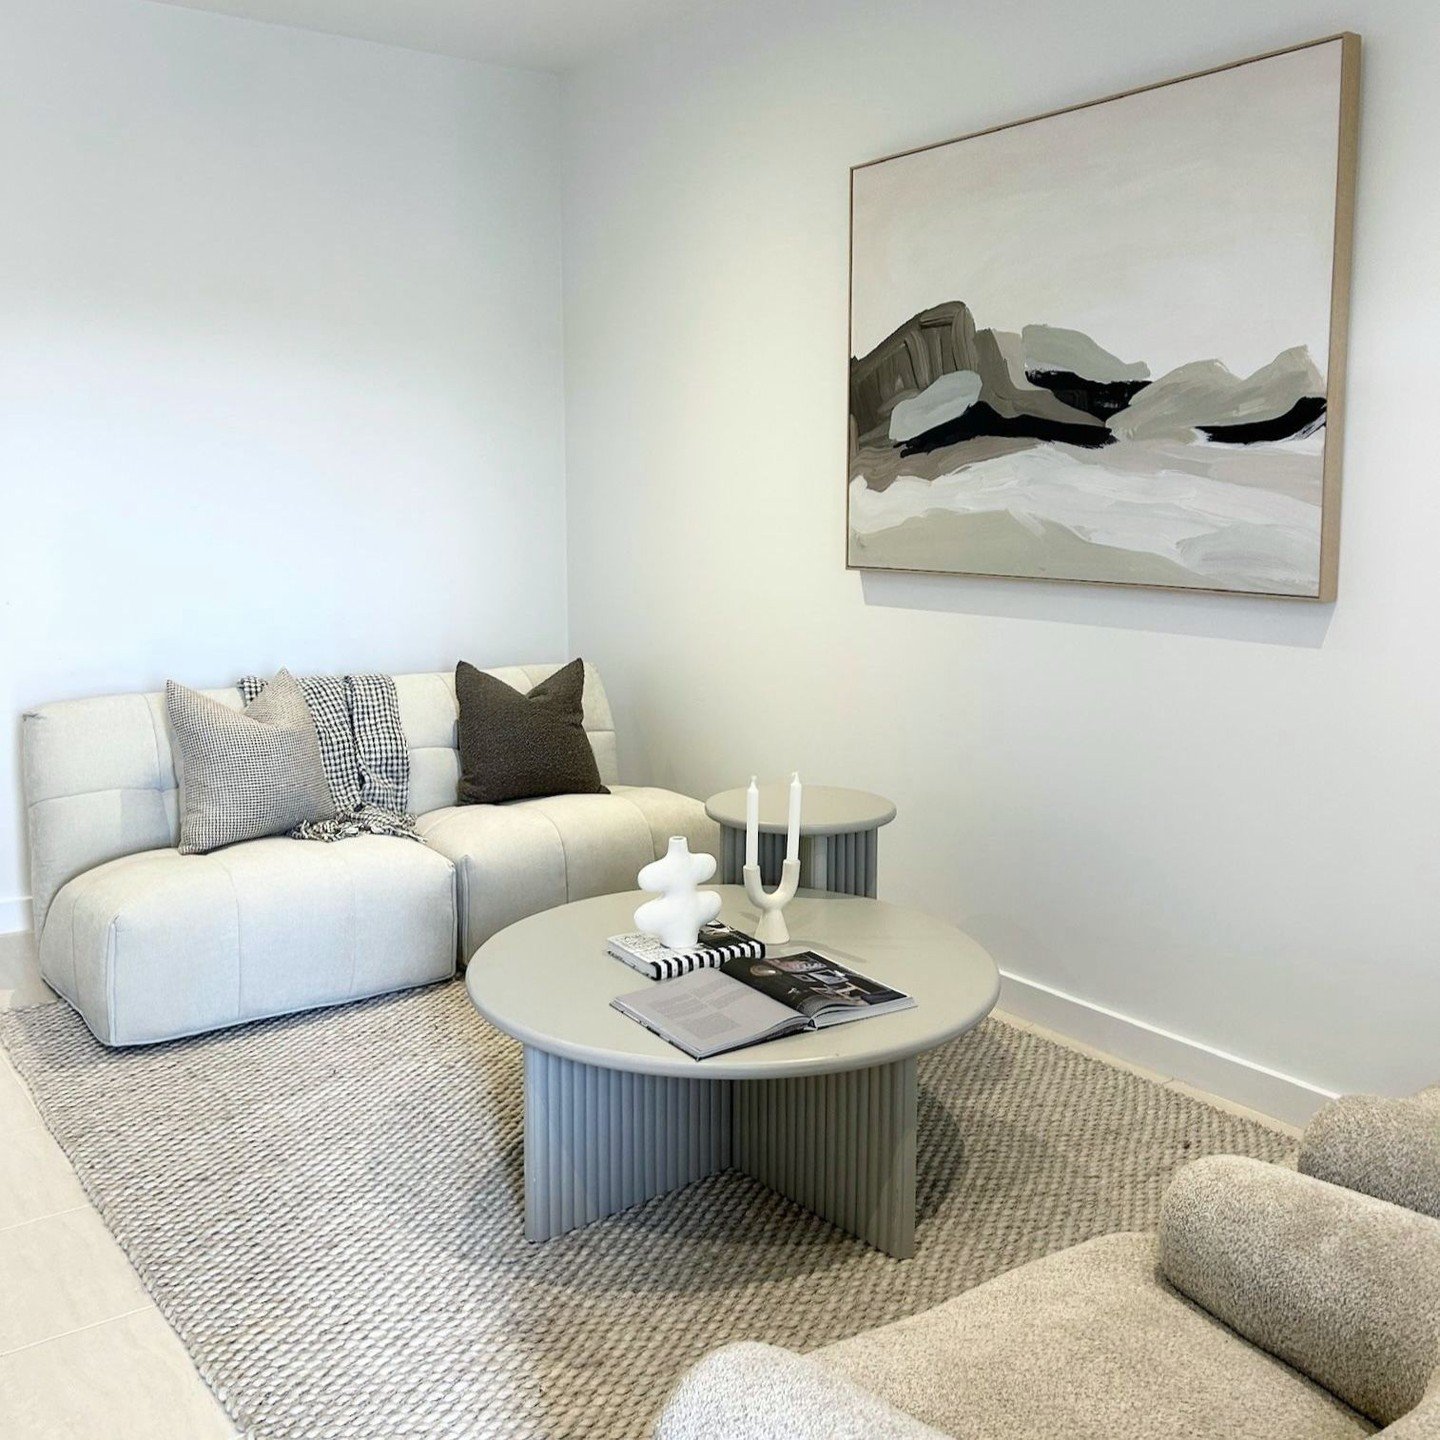 How dreamy is this sitting room... we opted for our modern neutral style for this space and we adore it! It makes us feel calm ☁️

#kepropertystylingmelbourne #propertystylingmelbourne #realestate #housestyling #bestpropertystylistsmelbourne #homesty